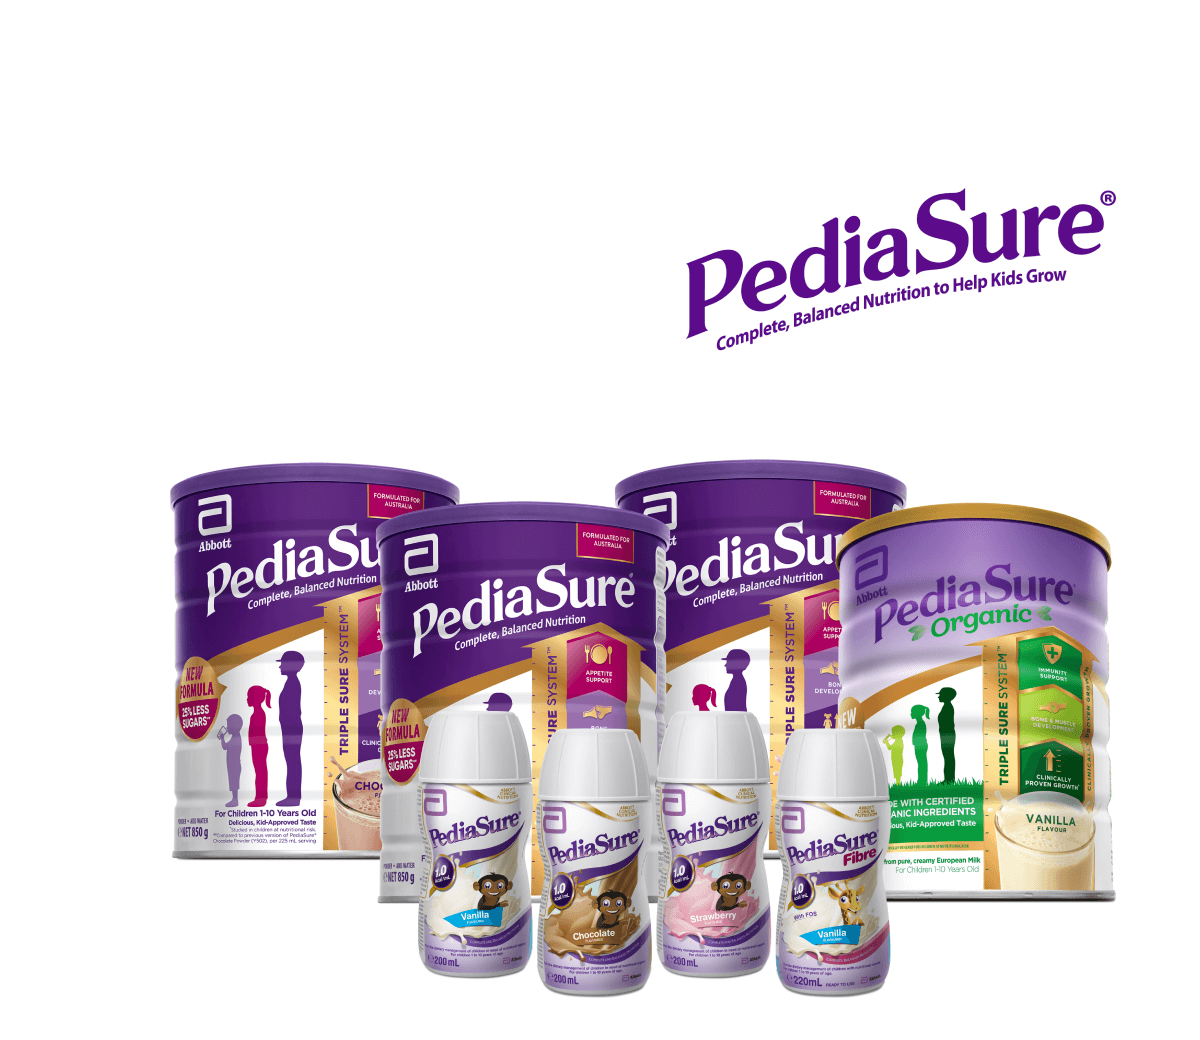 PediaSure® - Complete and balanced nutritional supplement for kids including 28 essentials vitamins and minerals.